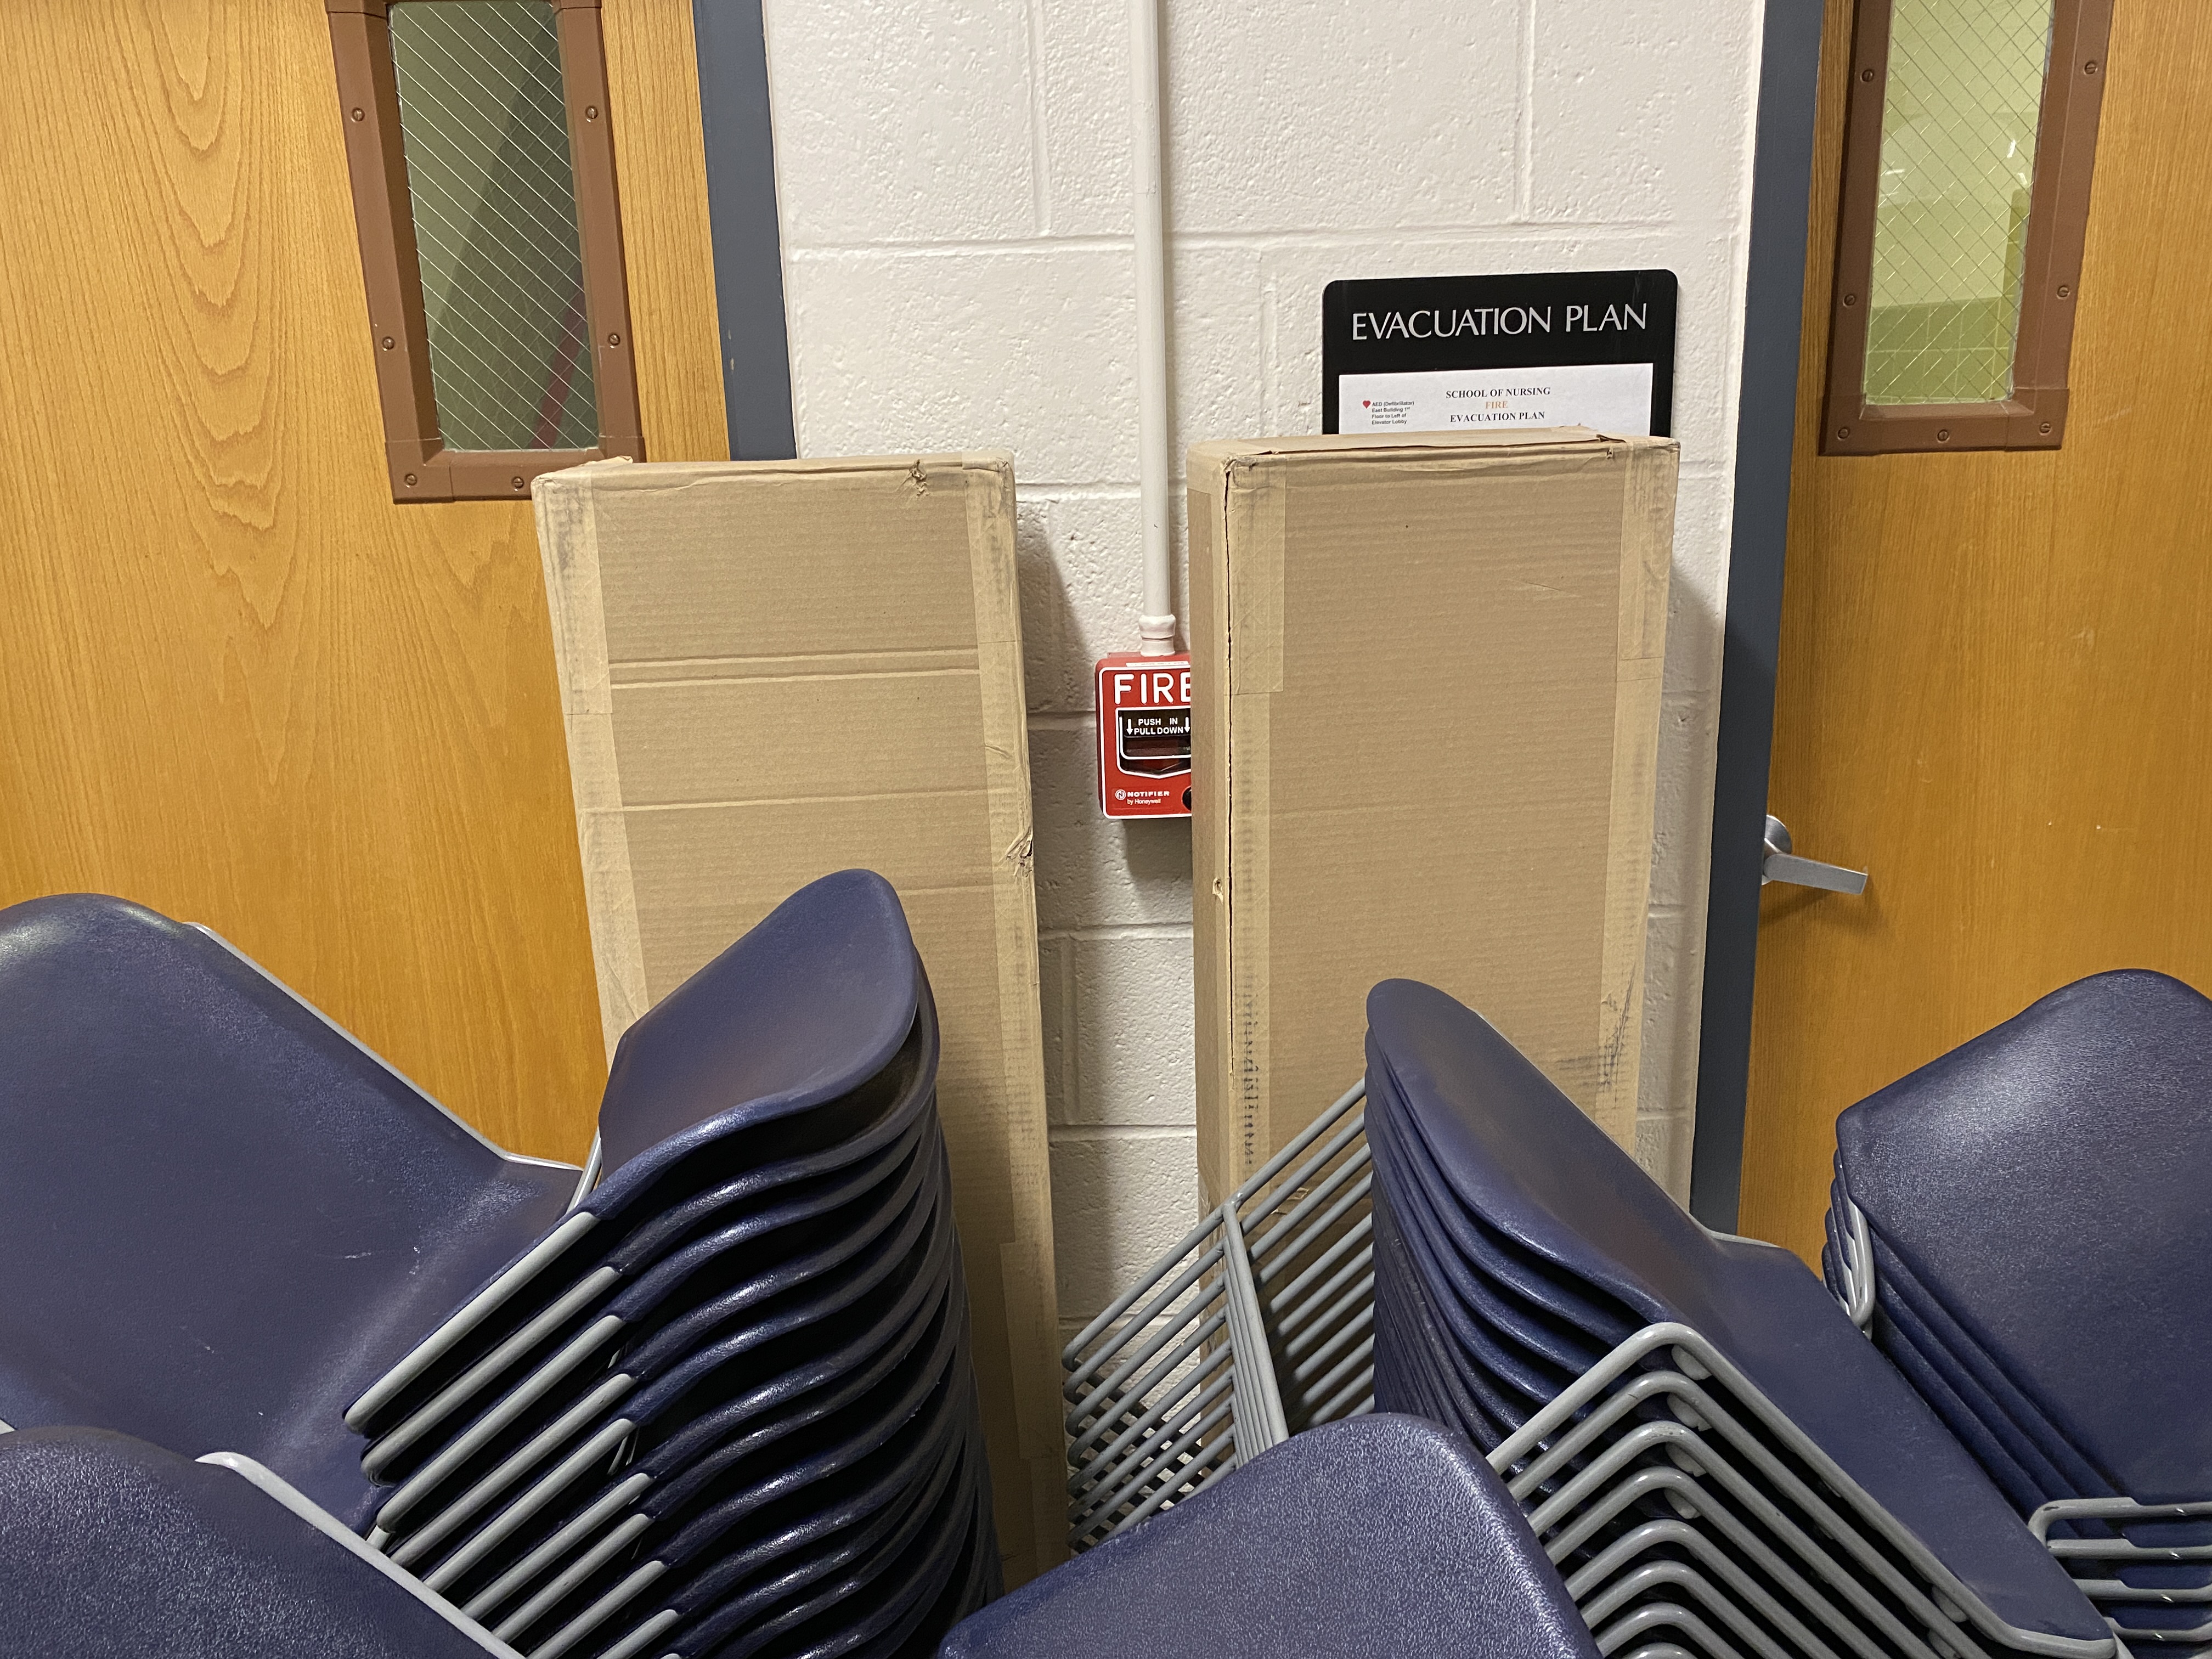 A manual pull station obstructed by boxes.